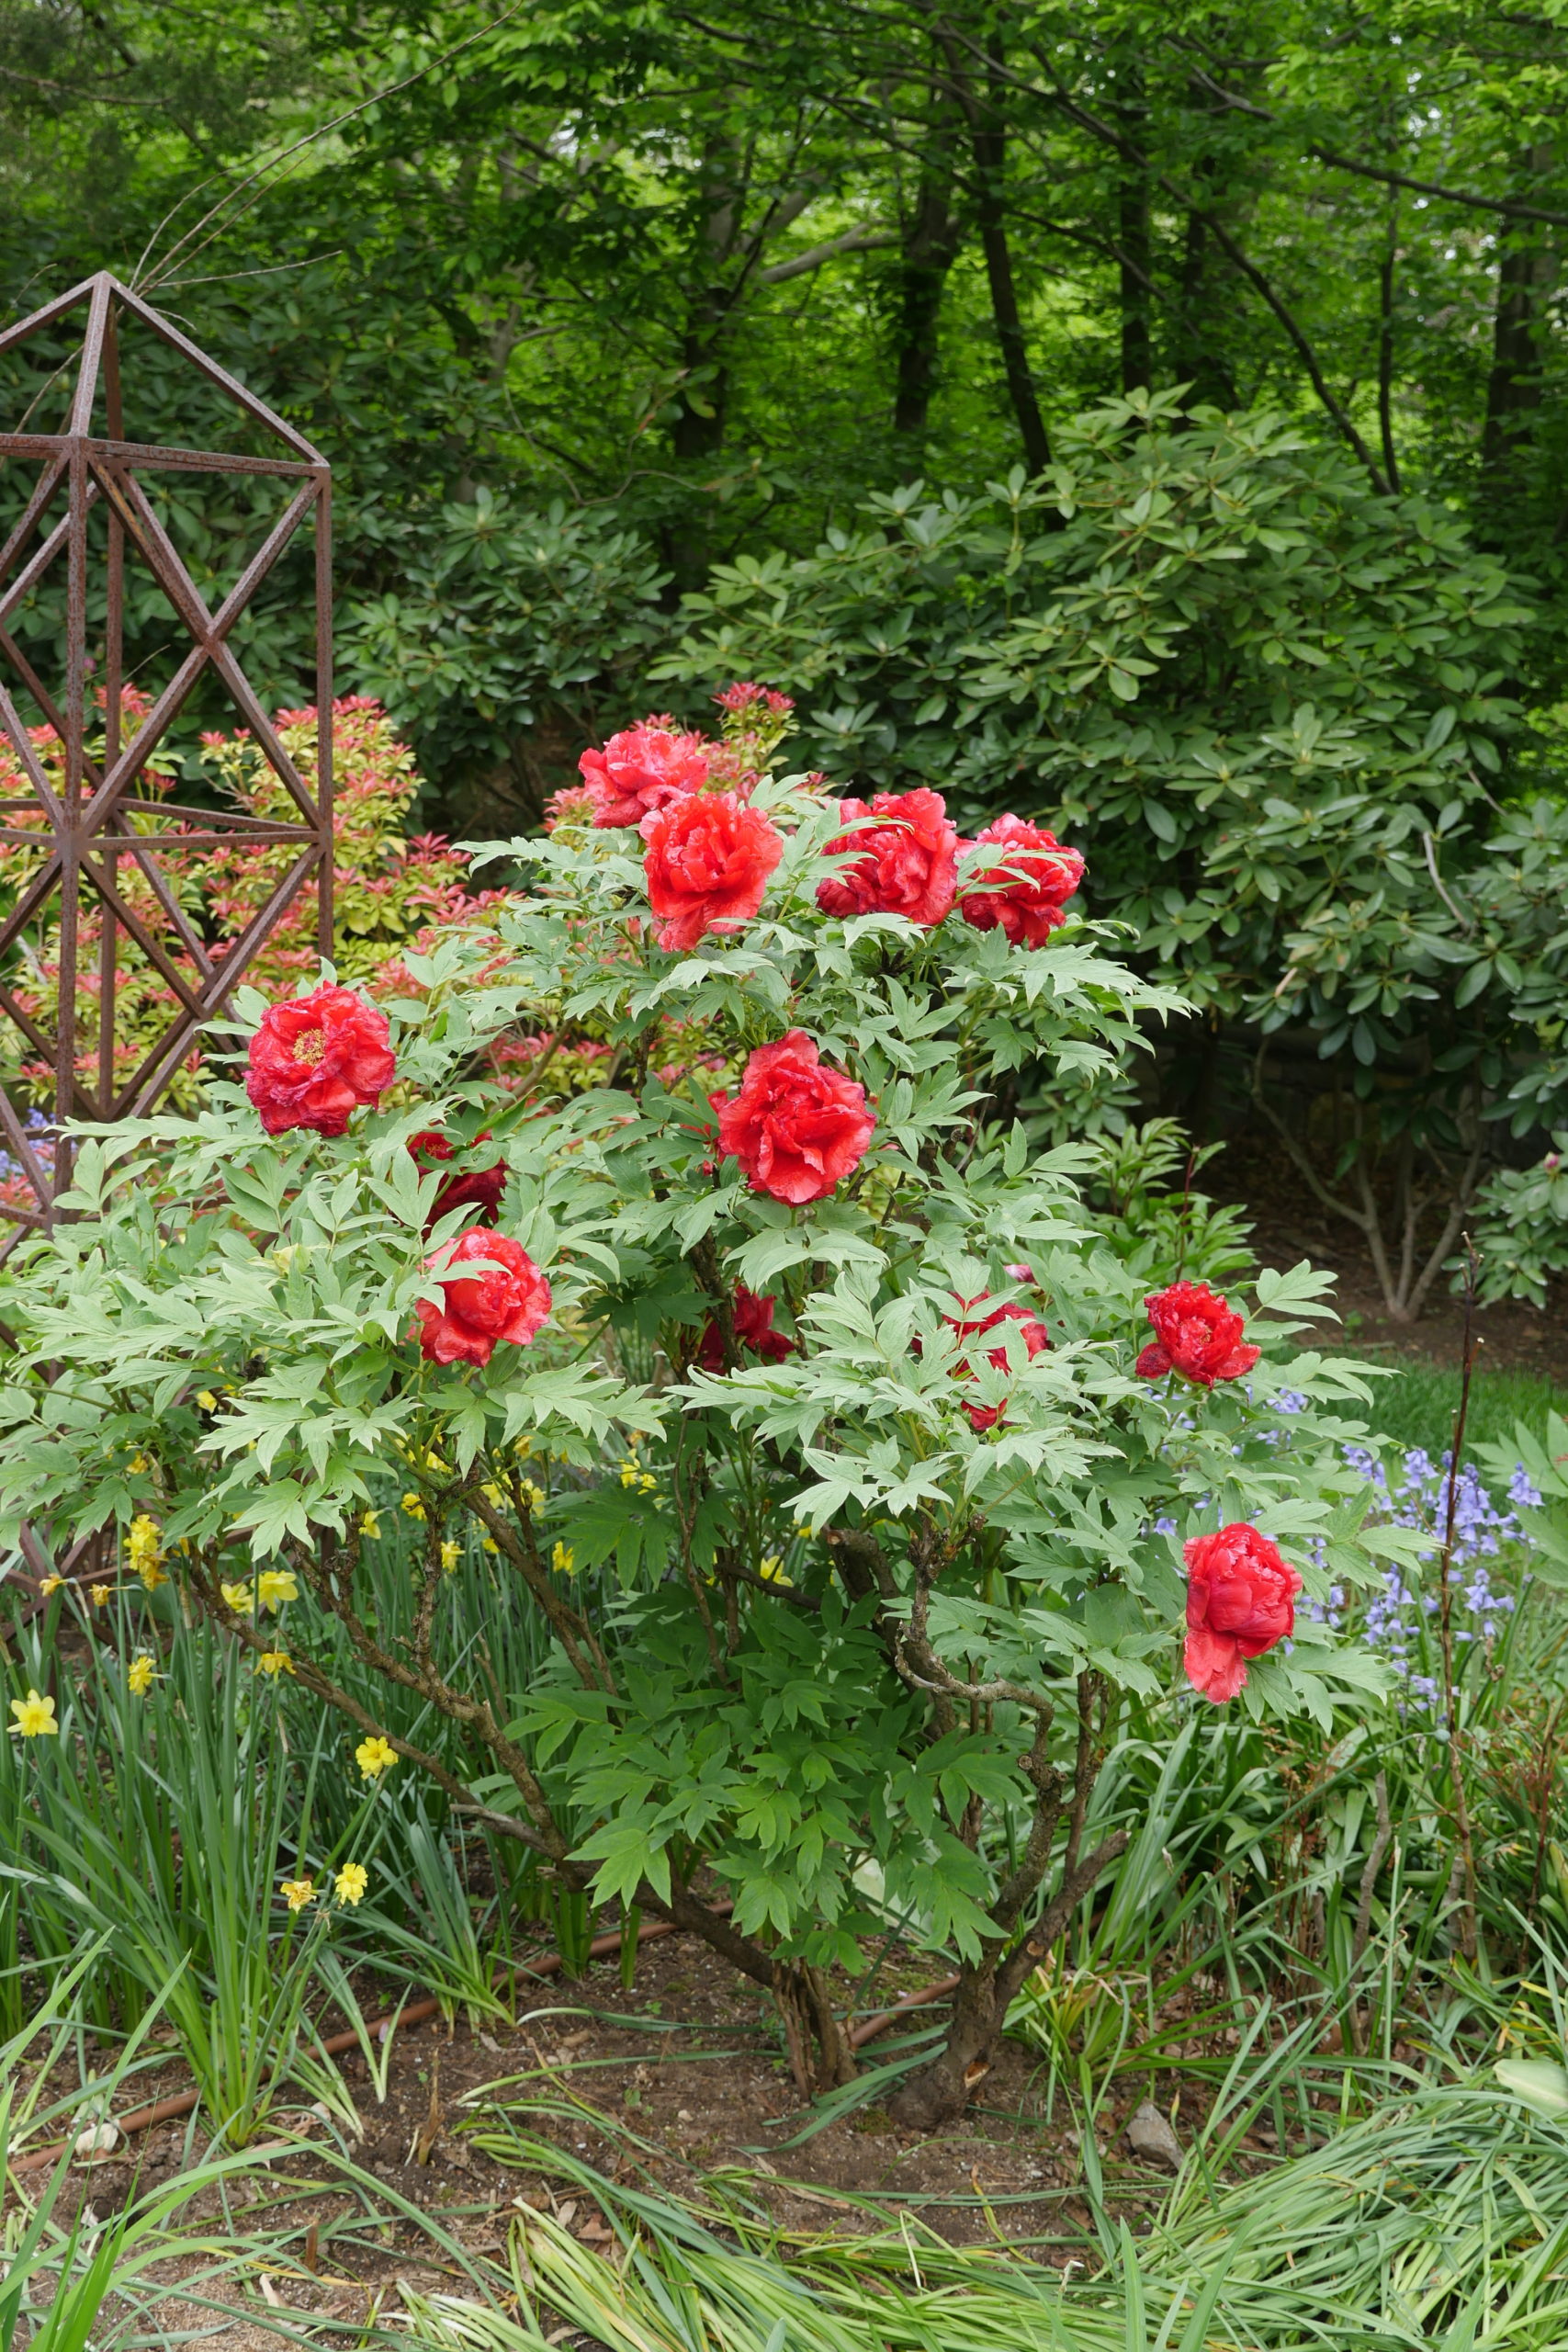 This is a double-red, true tree peony that grows to about 5 feet in flower.  It flowers somewhat early out here in mid to late May.